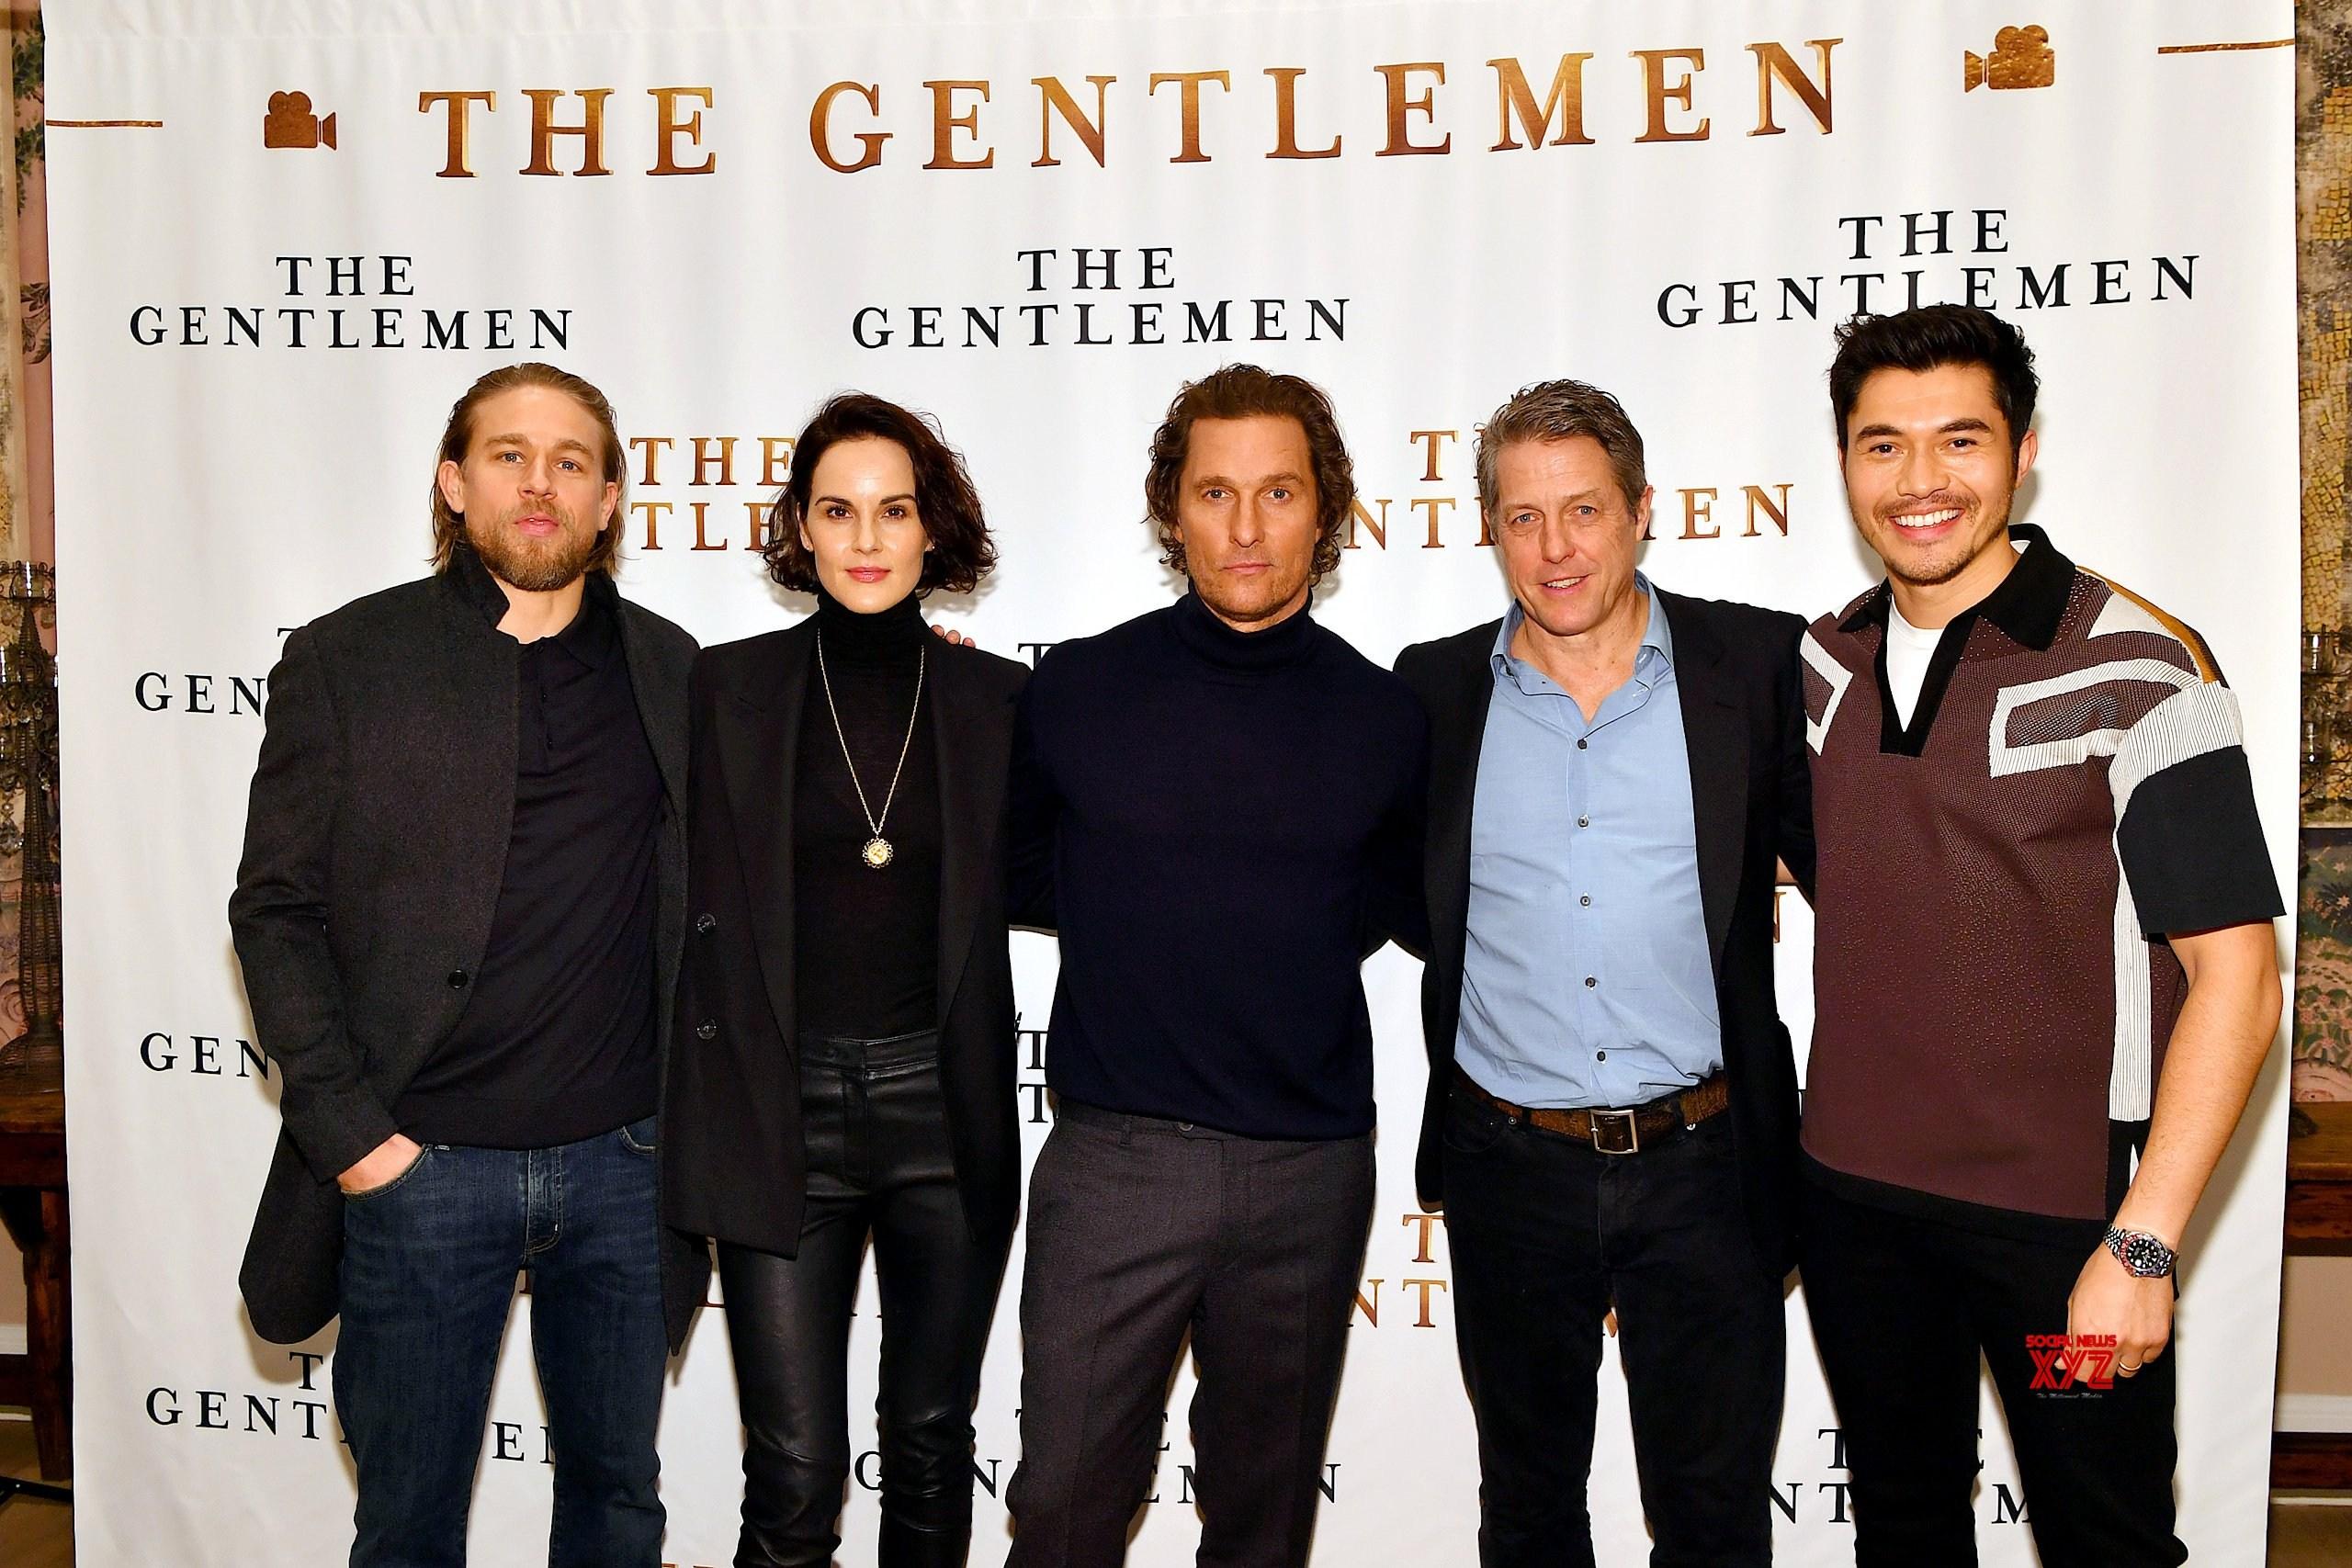 37 Top Images The Gentleman Movie Rating : The Gentlemen movie review: Guy Ritchie returns to his ...